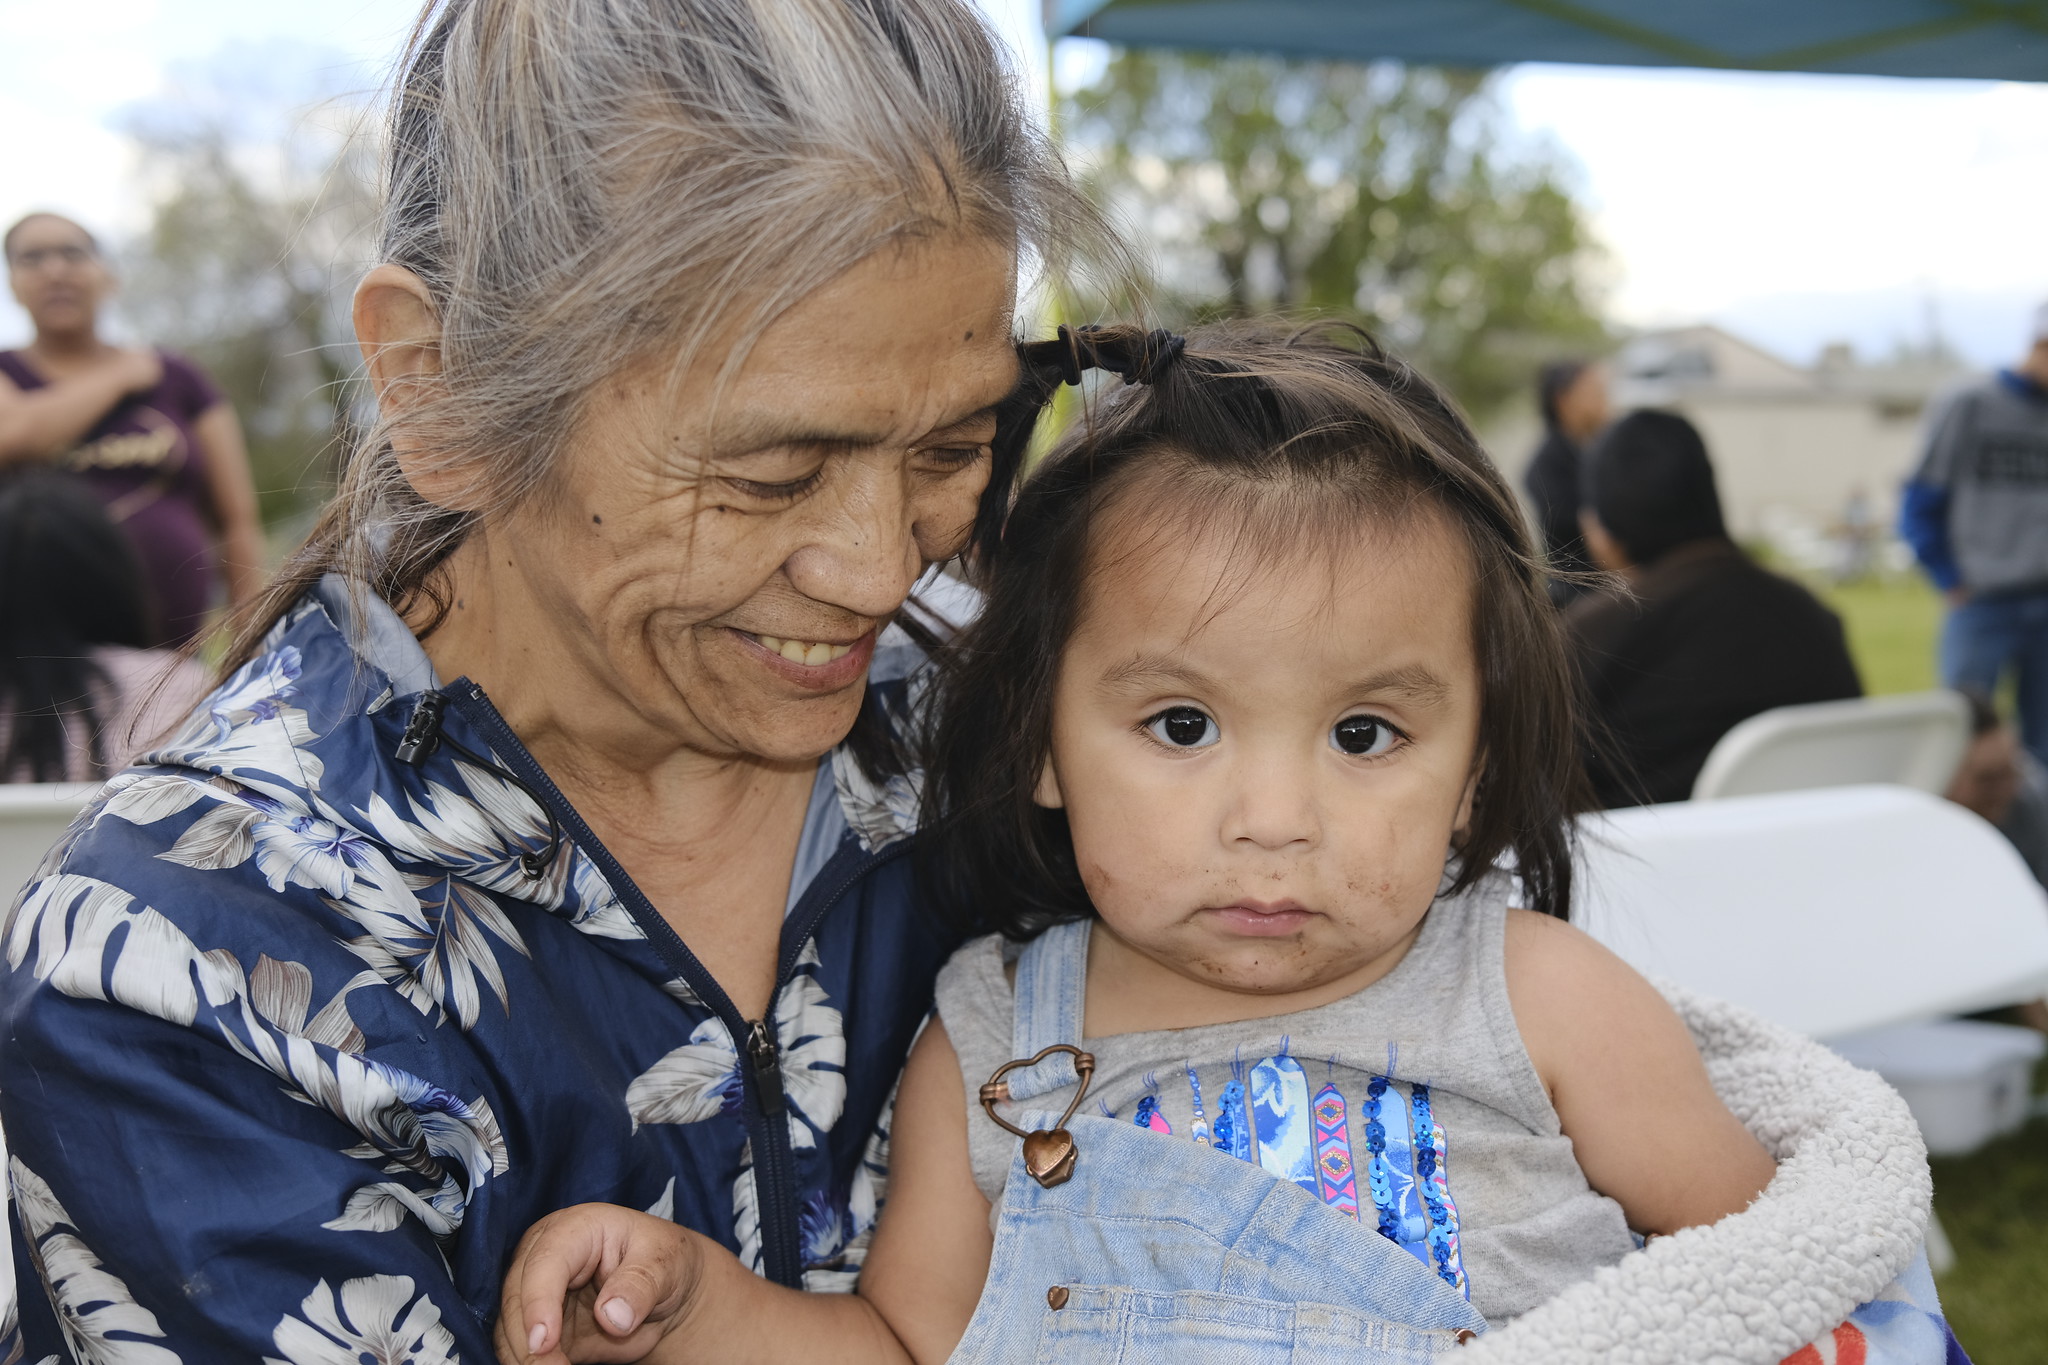 Tribal citizen Kimiko Danzuka Mitchell smiles while holding her granddaughter at the shoe giveaway event.